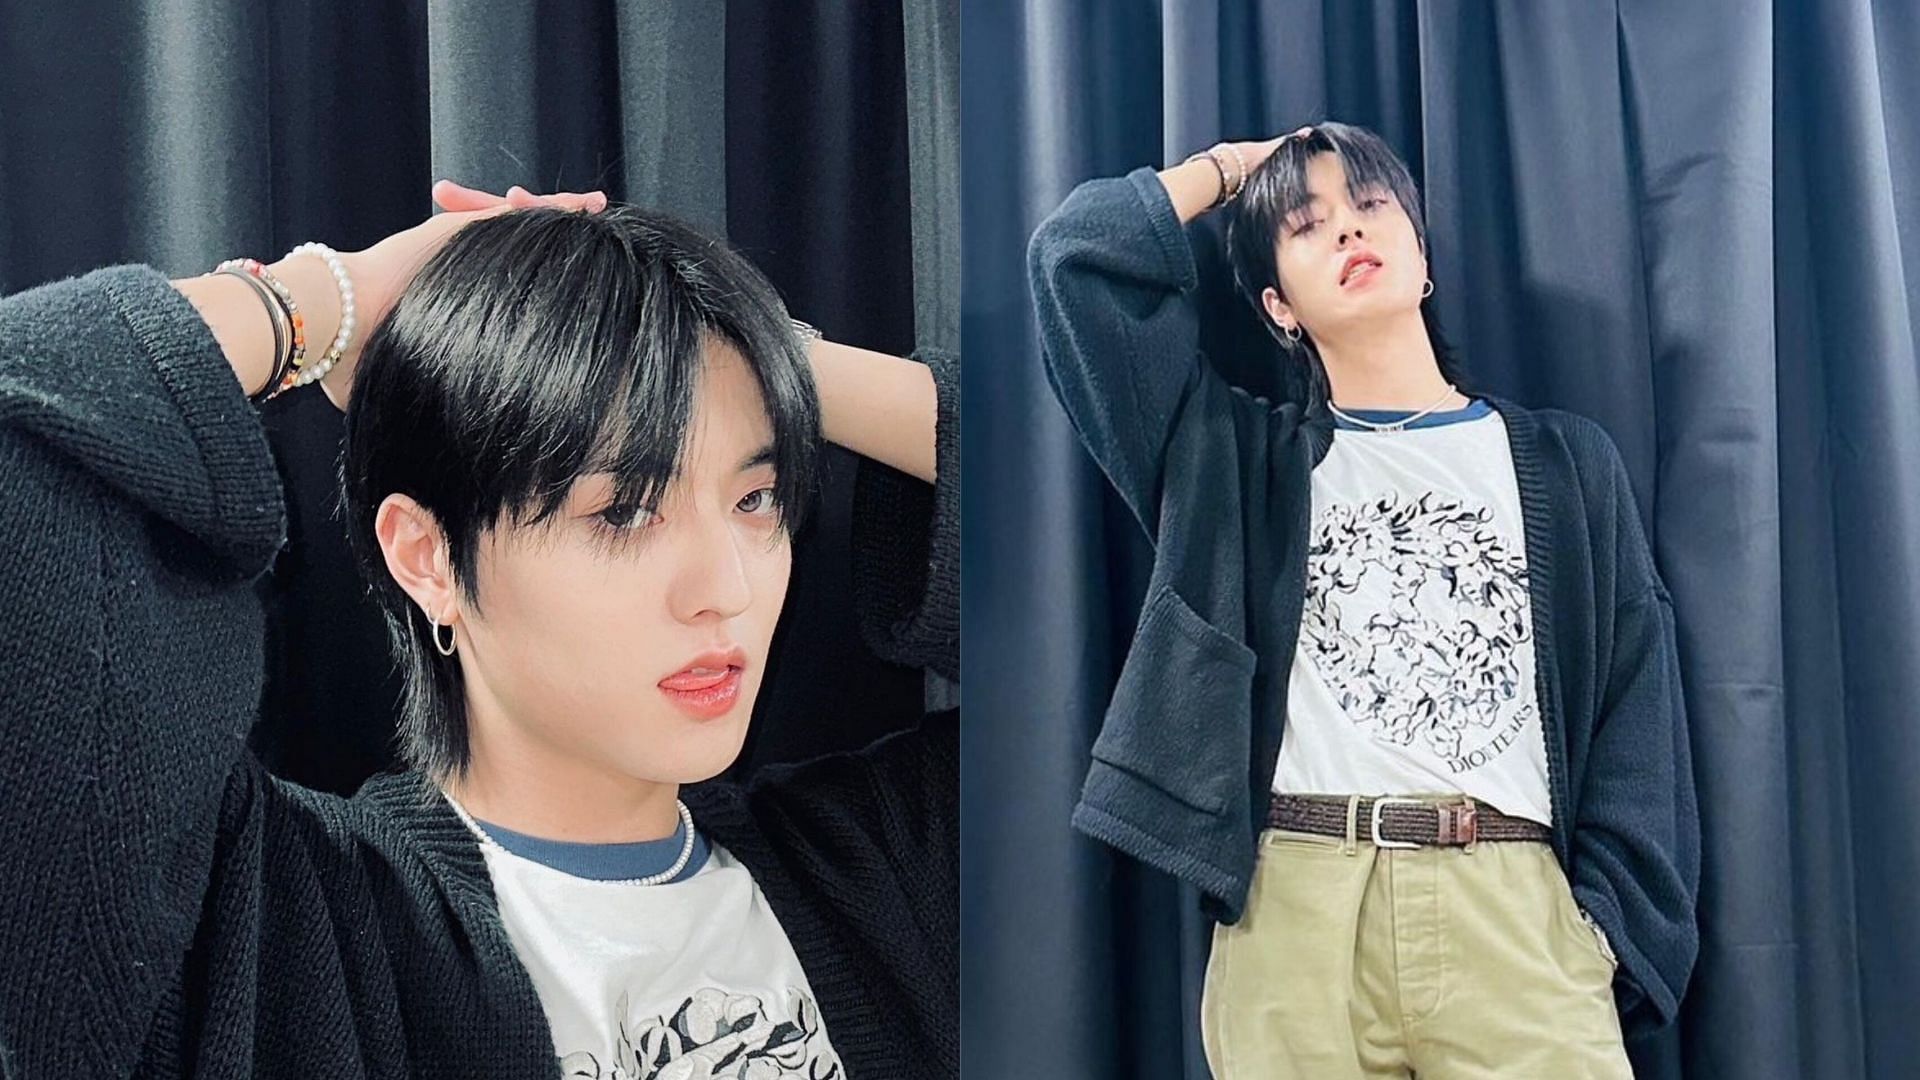 TREASURE Haruto receives unknown calls during his audio live session (Images via Instagram/@yg_treasure_official)